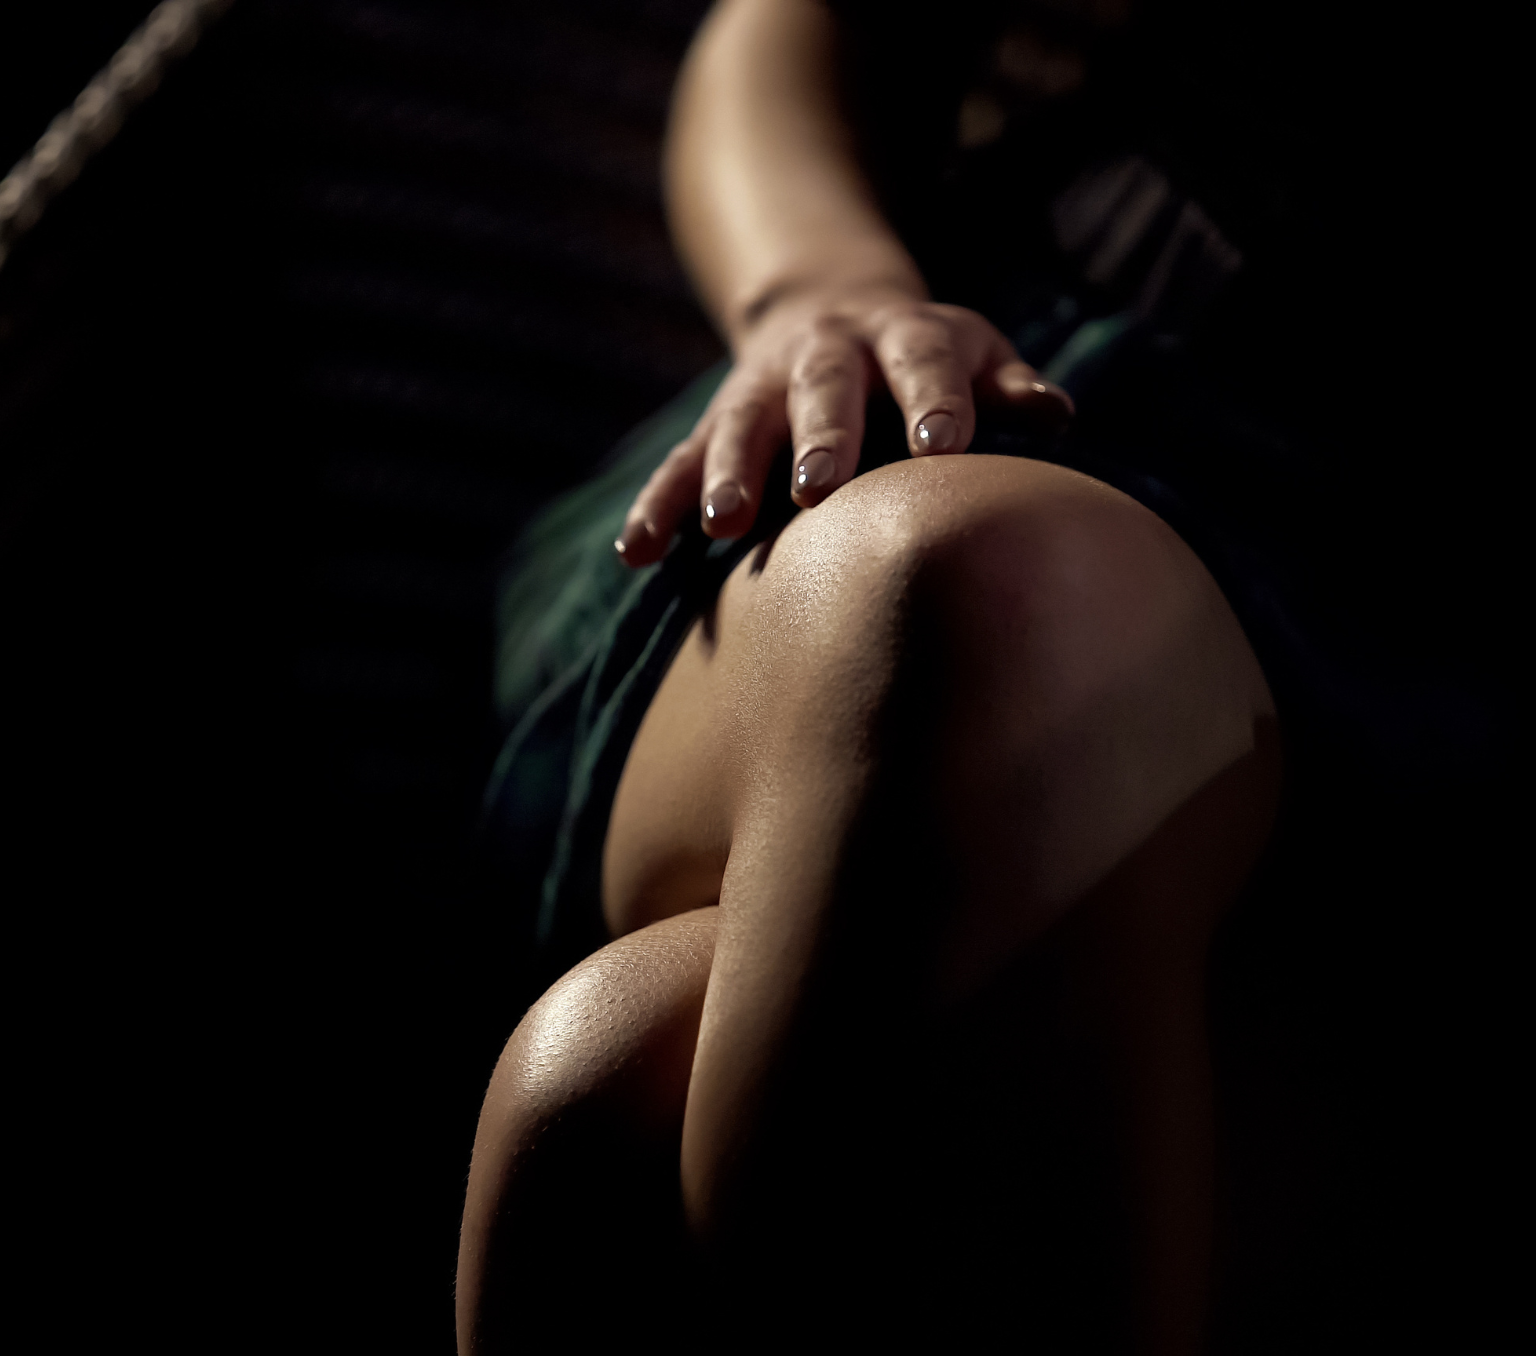 A woman wearing a dress has her legs crossed and her hand on the top of her leg.